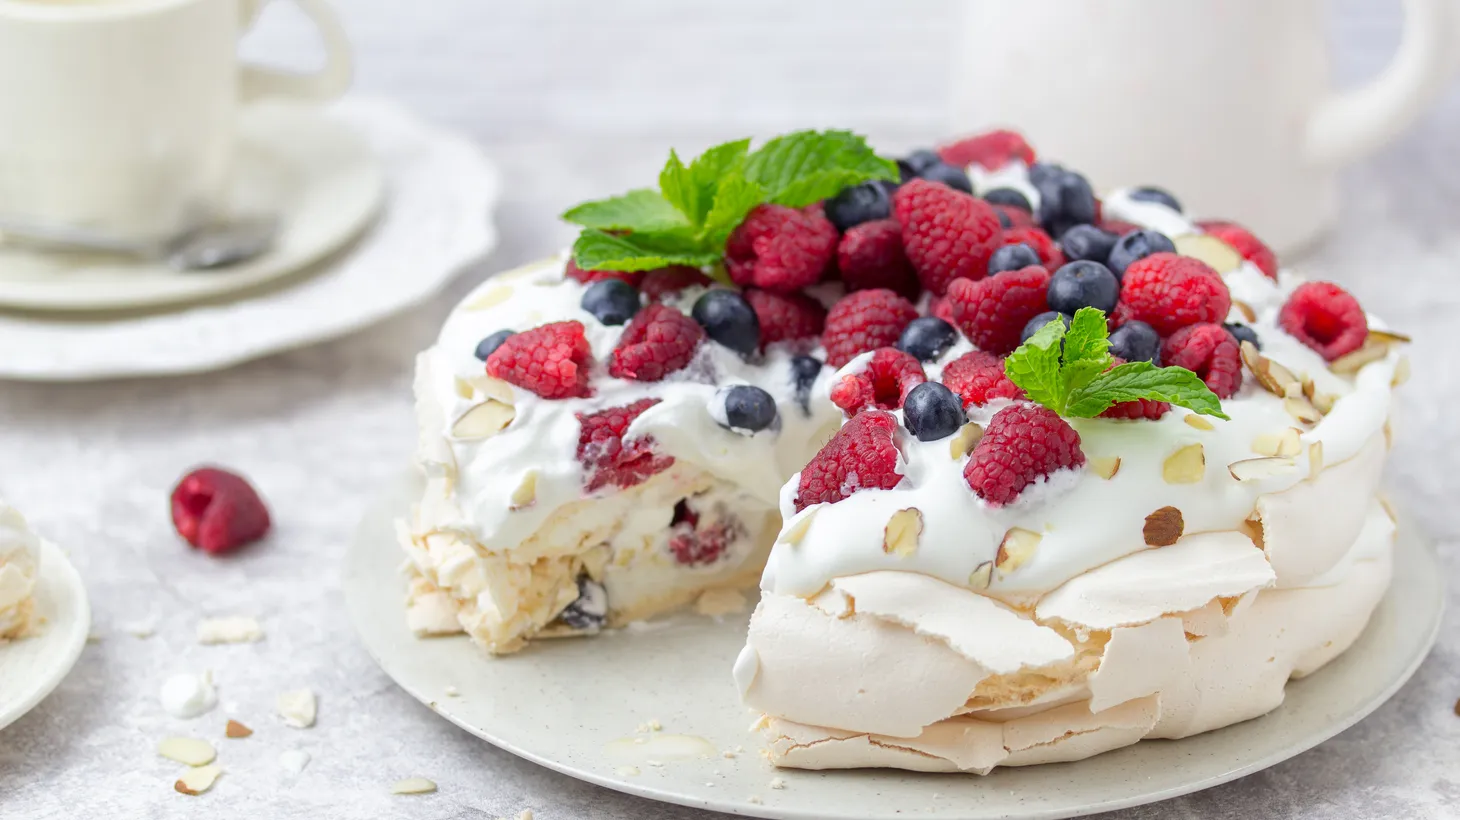 A classic pavlova is made in cake form, filled with berries and cream.